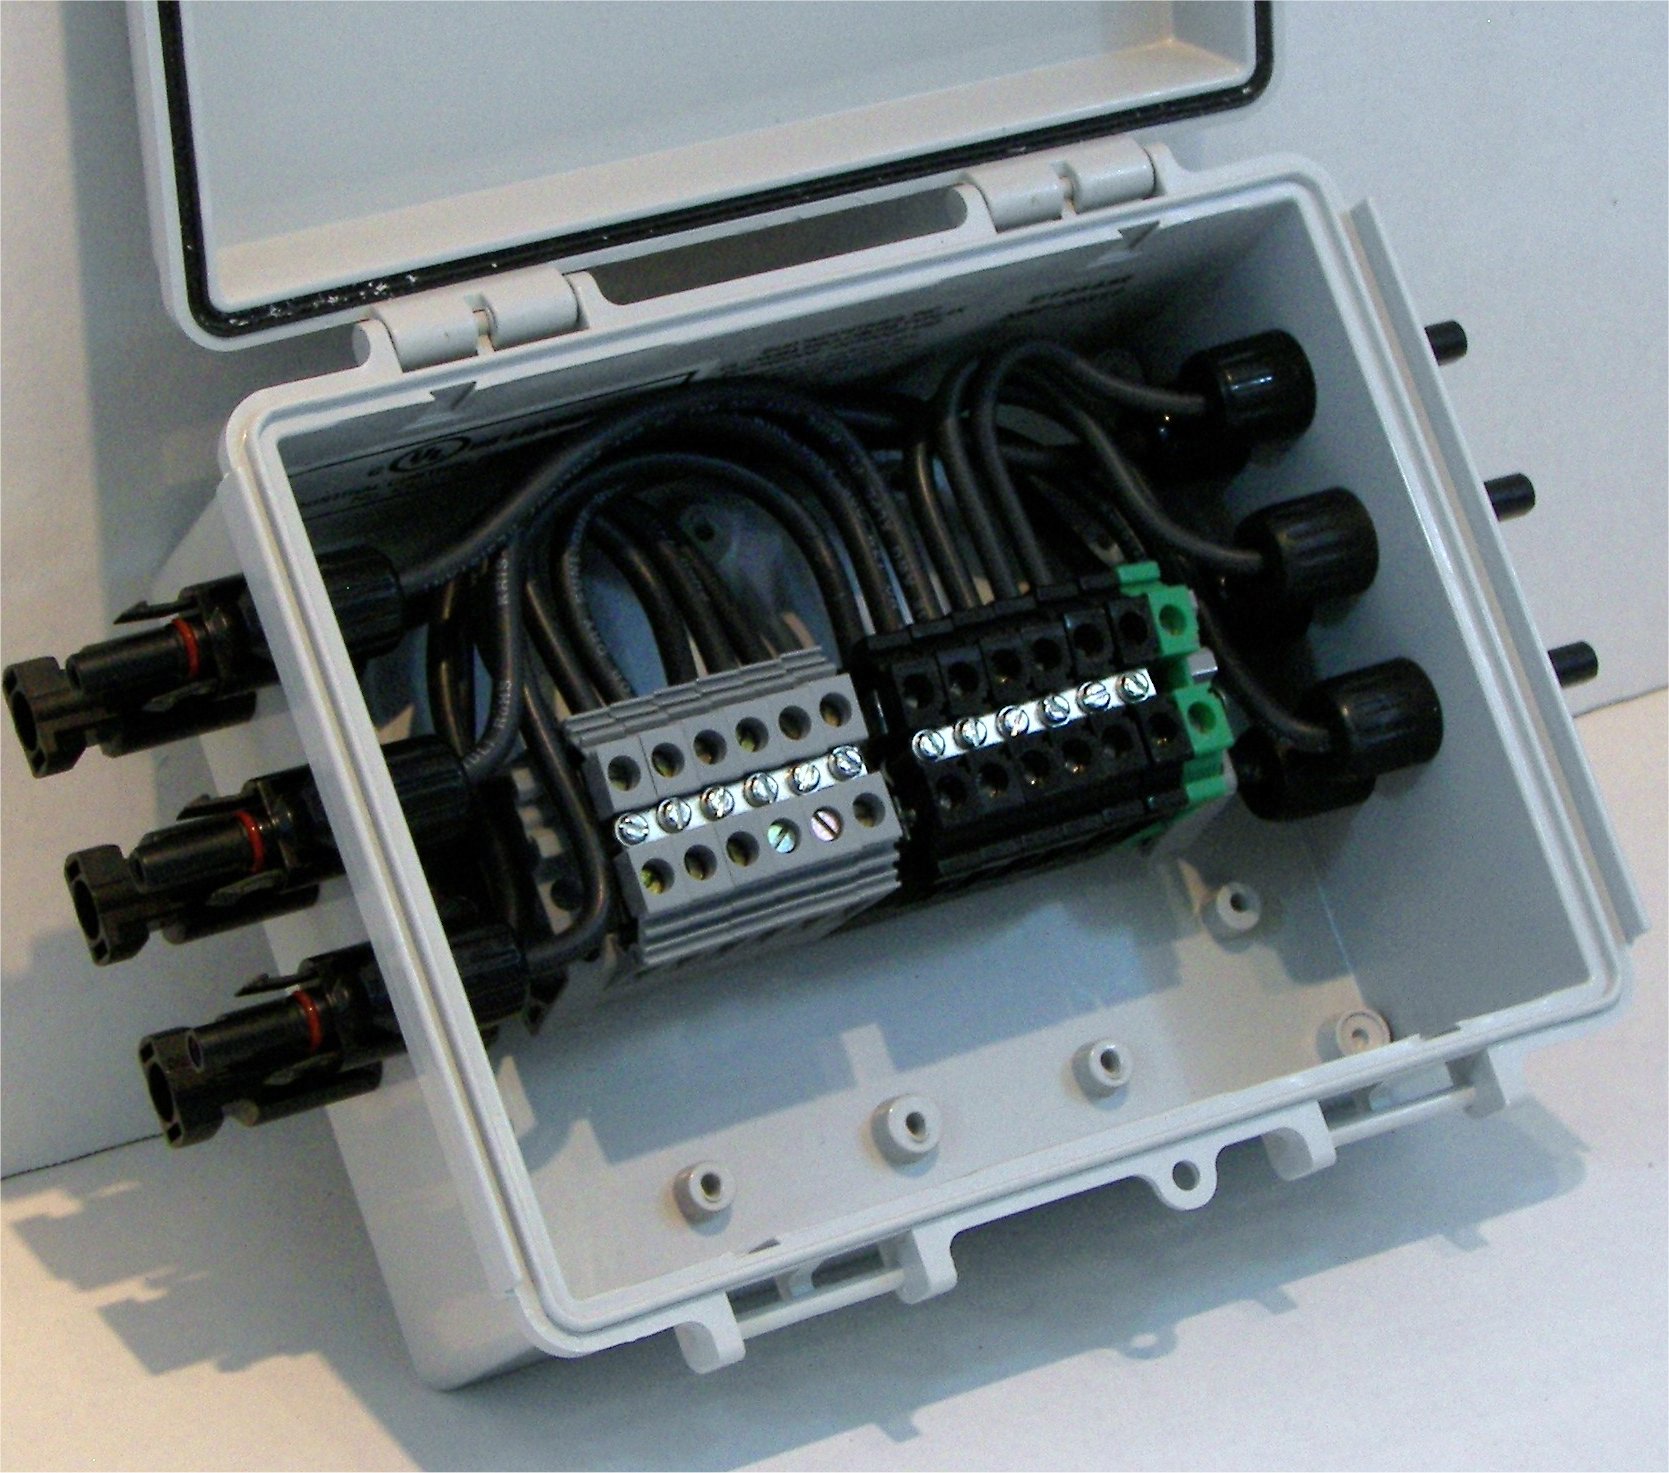 6-String Pre-wired Solar Power Combiner Box